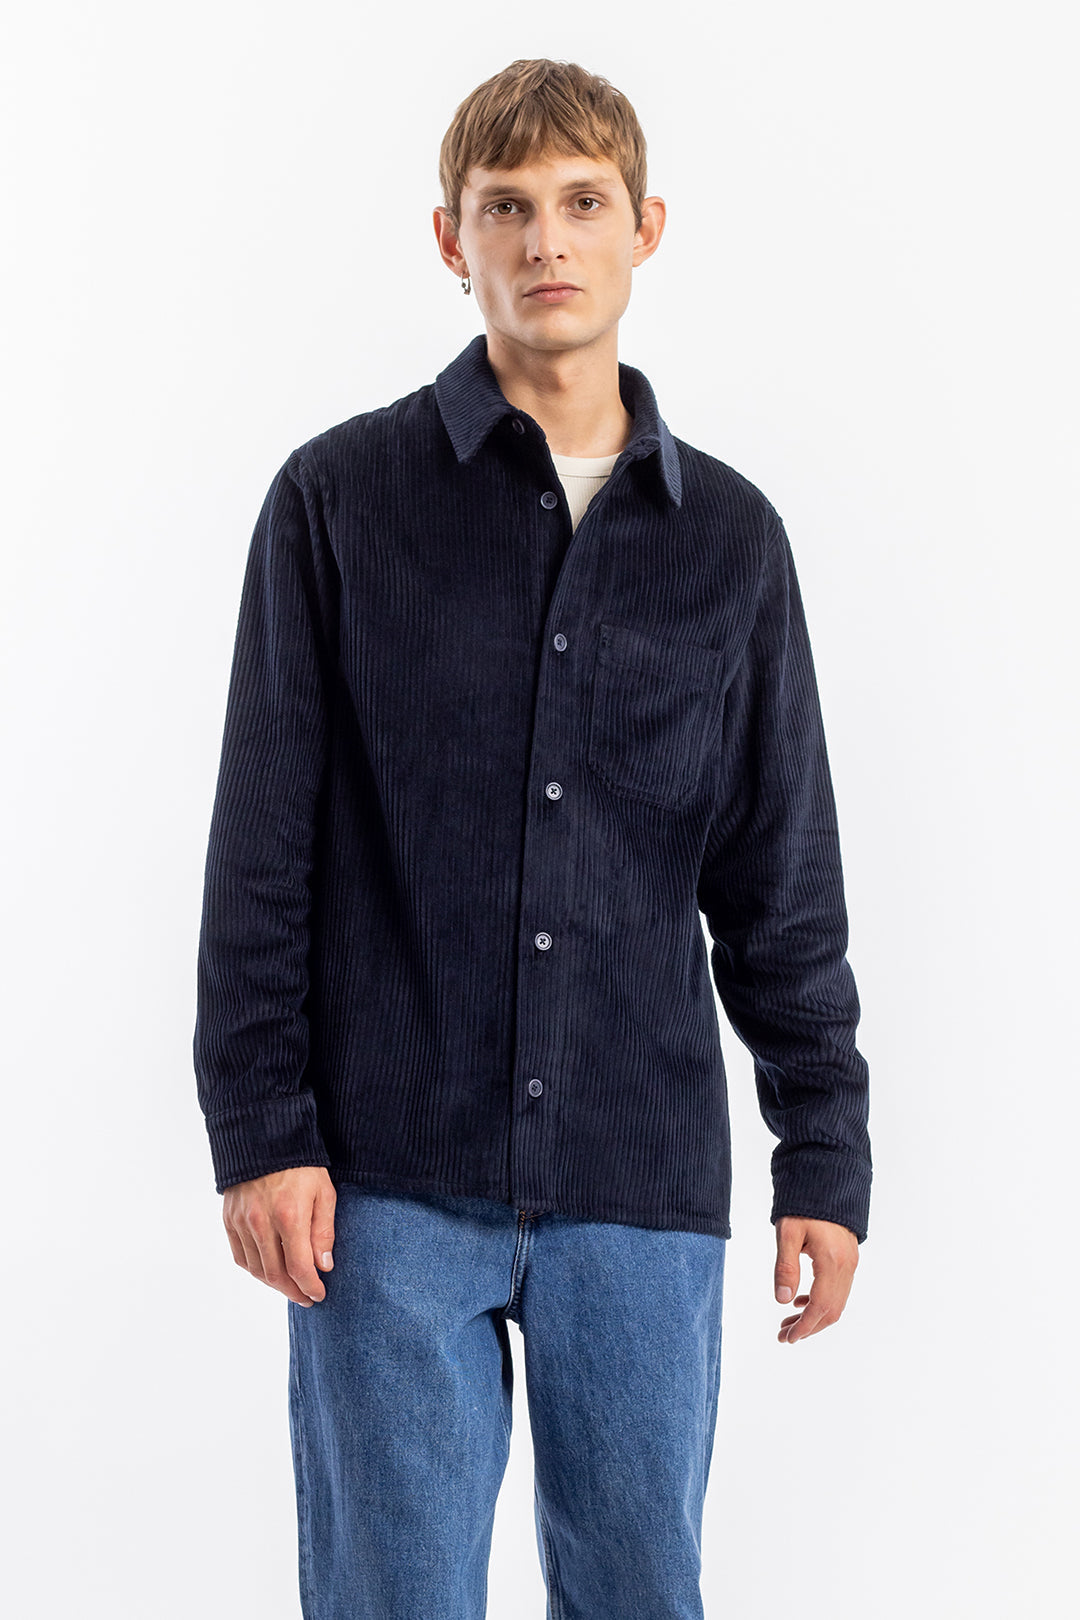 Dark blue corduroy shirt made from 100% organic cotton from Rotholz